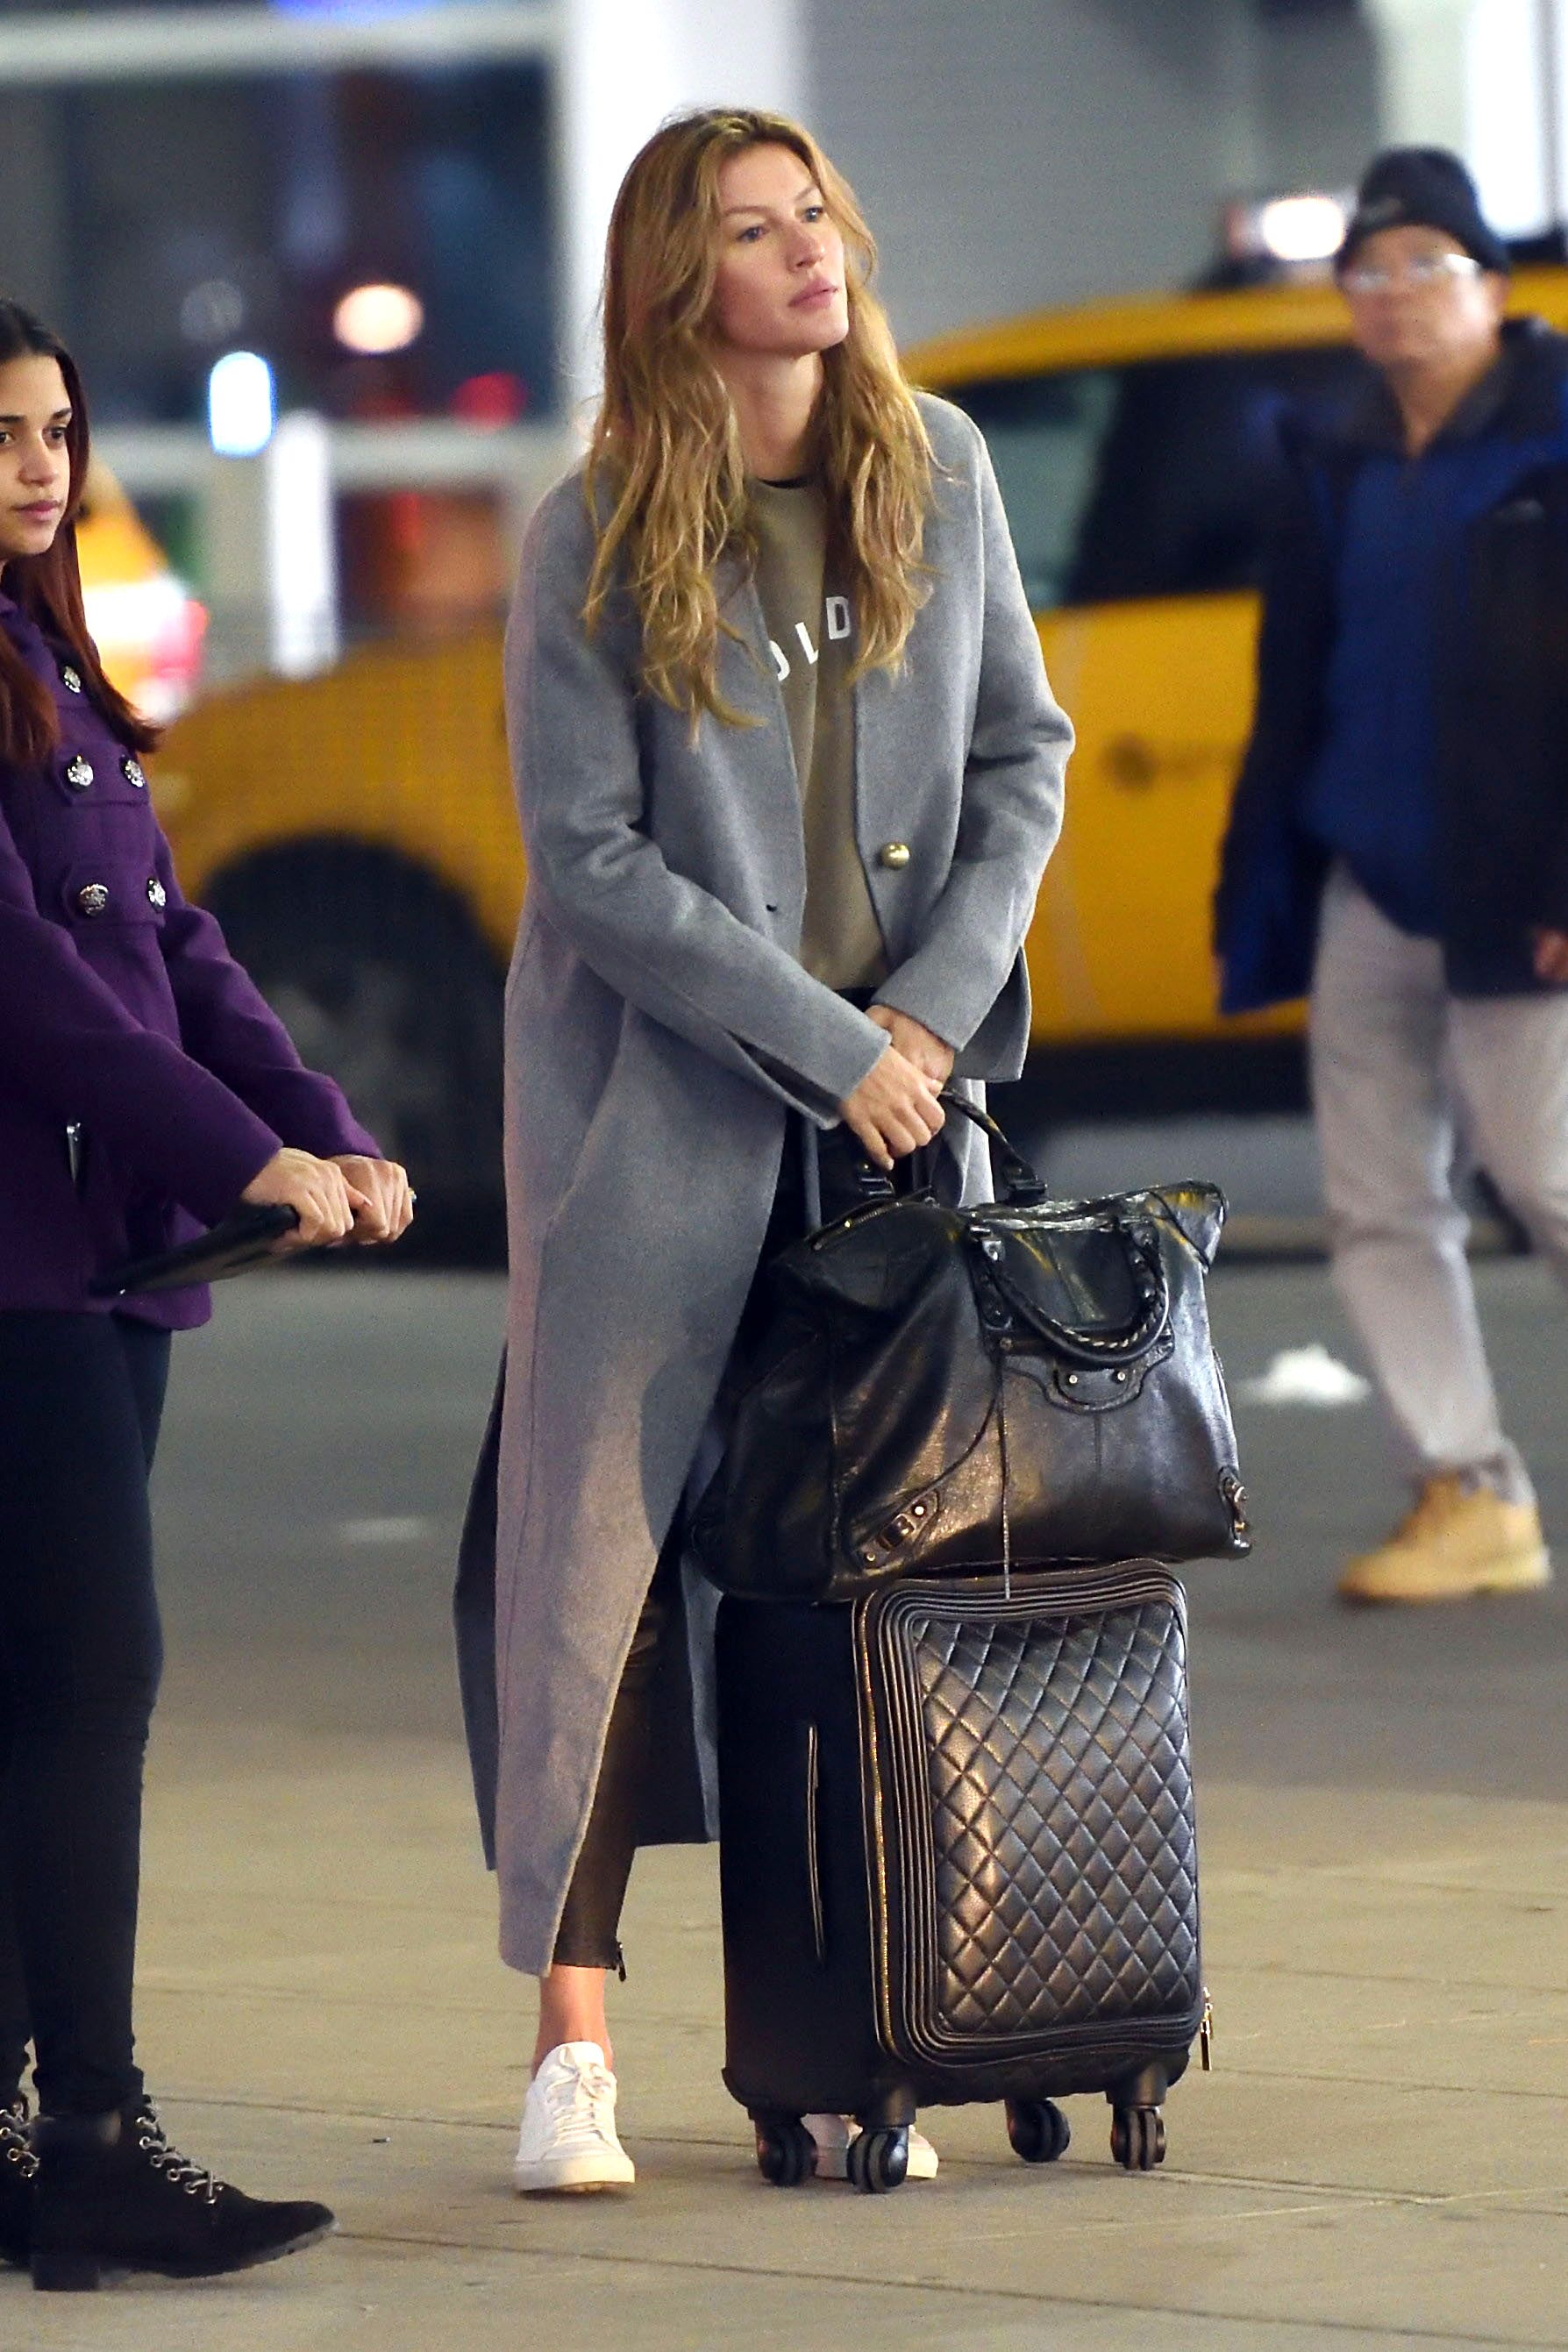 Gisele Bundchen arrives JFK Airport this morning to catch a flight out